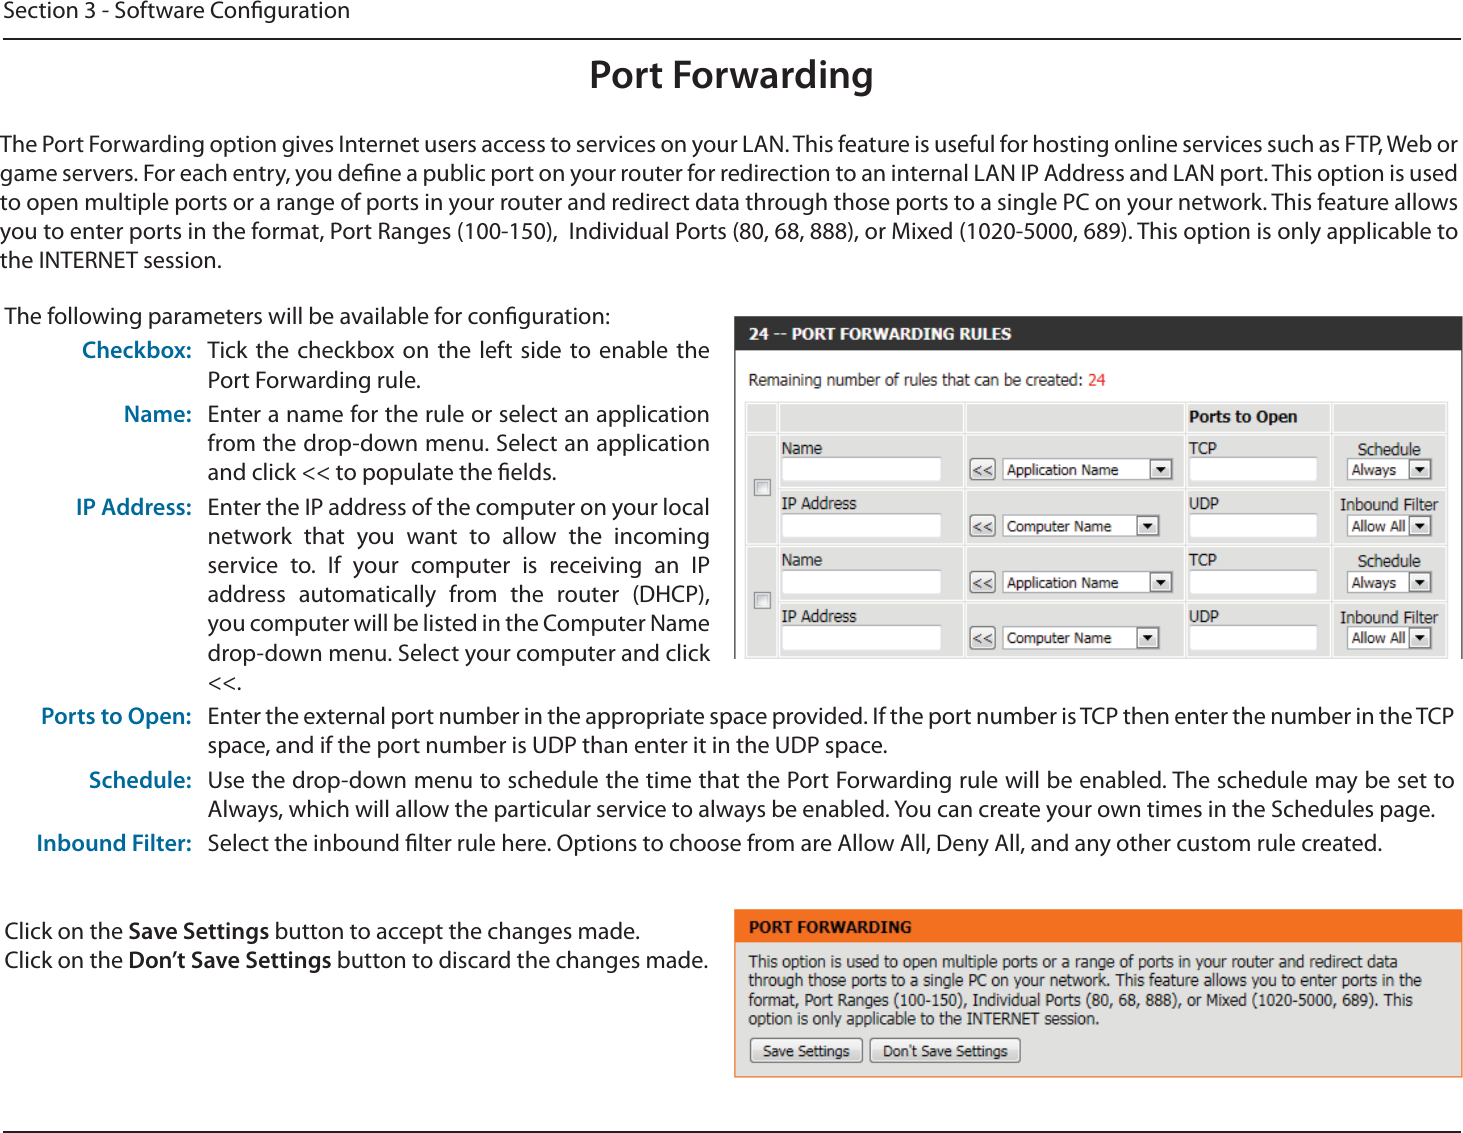 Section 3 - Software CongurationPort ForwardingThe Port Forwarding option gives Internet users access to services on your LAN. This feature is useful for hosting online services such as FTP, Web or game servers. For each entry, you dene a public port on your router for redirection to an internal LAN IP Address and LAN port. This option is used to open multiple ports or a range of ports in your router and redirect data through those ports to a single PC on your network. This feature allows you to enter ports in the format, Port Ranges (100-150),  Individual Ports (80, 68, 888), or Mixed (1020-5000, 689). This option is only applicable to the INTERNET session.The following parameters will be available for conguration:Checkbox: Tick the checkbox on the left side to enable the Port Forwarding rule.Name: Enter a name for the rule or select an application from the drop-down menu. Select an application and click &lt;&lt; to populate the elds.IP Address: Enter the IP address of the computer on your local network that you want to allow the incoming service to. If your computer is receiving an IP address automatically from the router (DHCP), you computer will be listed in the Computer Name drop-down menu. Select your computer and click &lt;&lt;.Ports to Open: Enter the external port number in the appropriate space provided. If the port number is TCP then enter the number in the TCP space, and if the port number is UDP than enter it in the UDP space.Schedule: Use the drop-down menu to schedule the time that the Port Forwarding rule will be enabled. The schedule may be set to Always, which will allow the particular service to always be enabled. You can create your own times in the Schedules page.Inbound Filter: Select the inbound lter rule here. Options to choose from are Allow All, Deny All, and any other custom rule created.Click on the Save Settings button to accept the changes made.Click on the Don’t Save Settings button to discard the changes made.